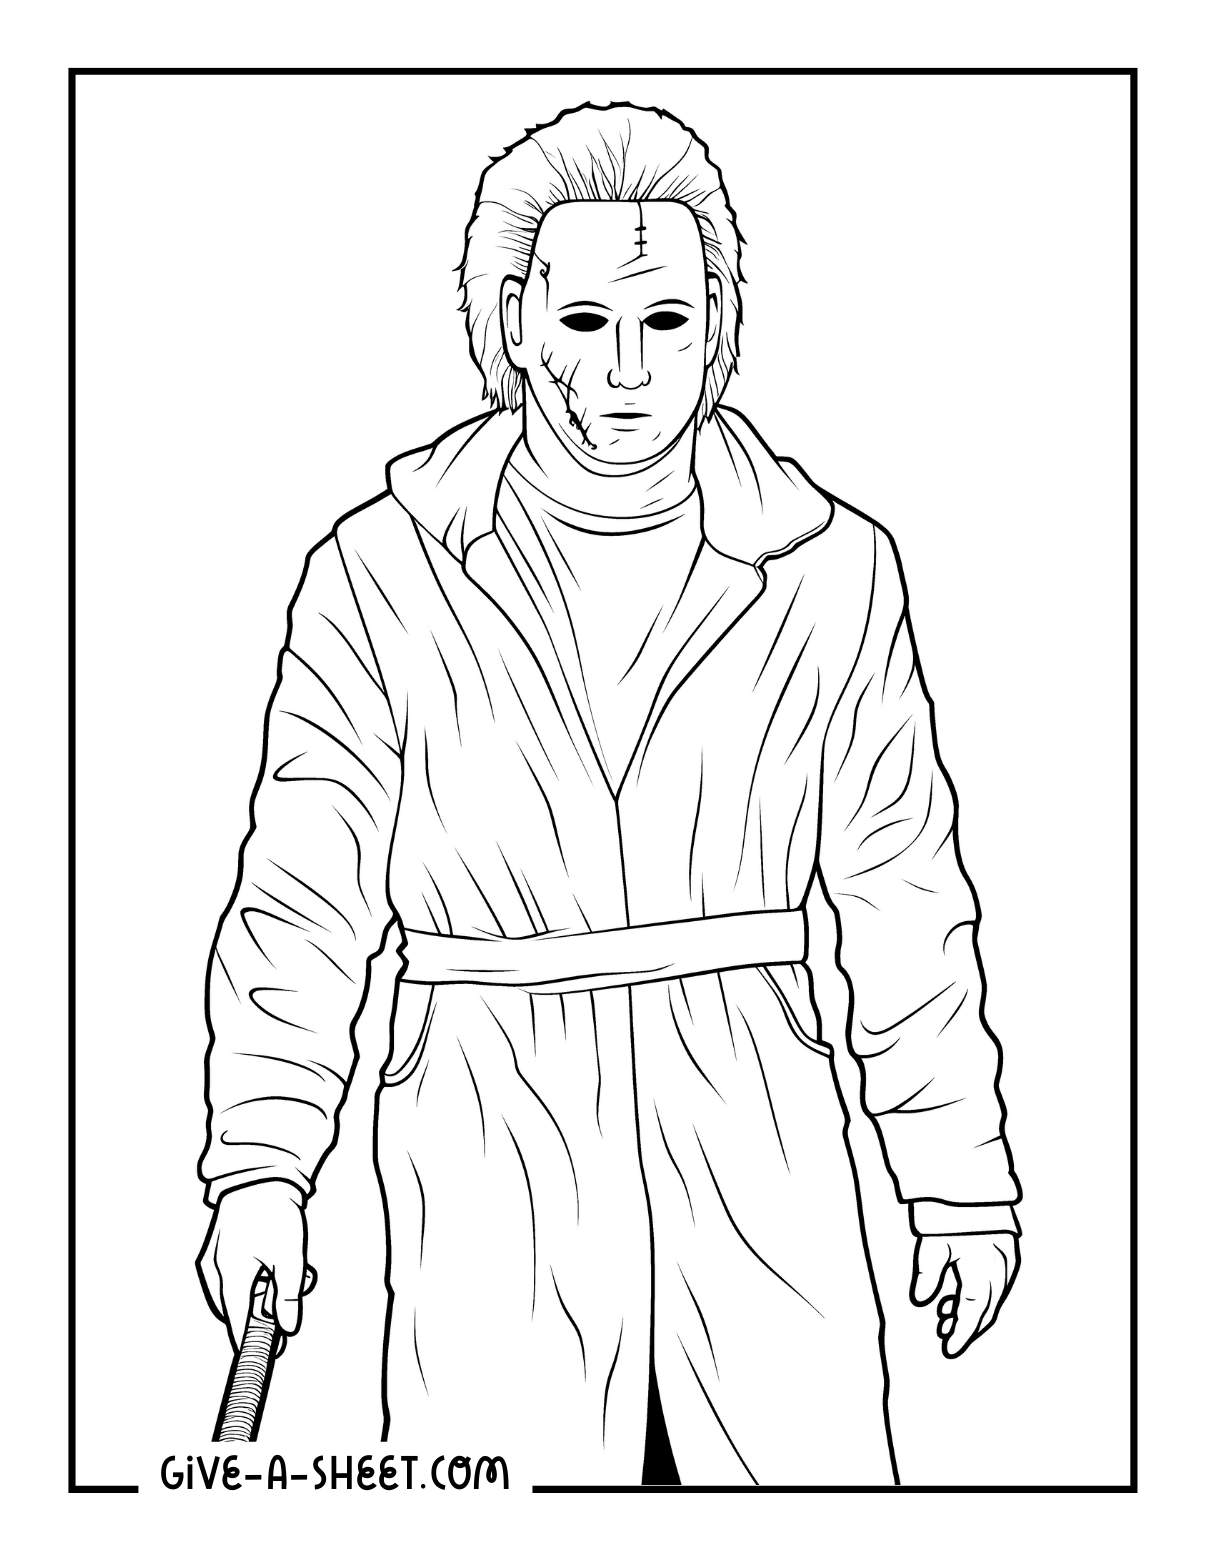 Michael Myers holding a knife coloring page.